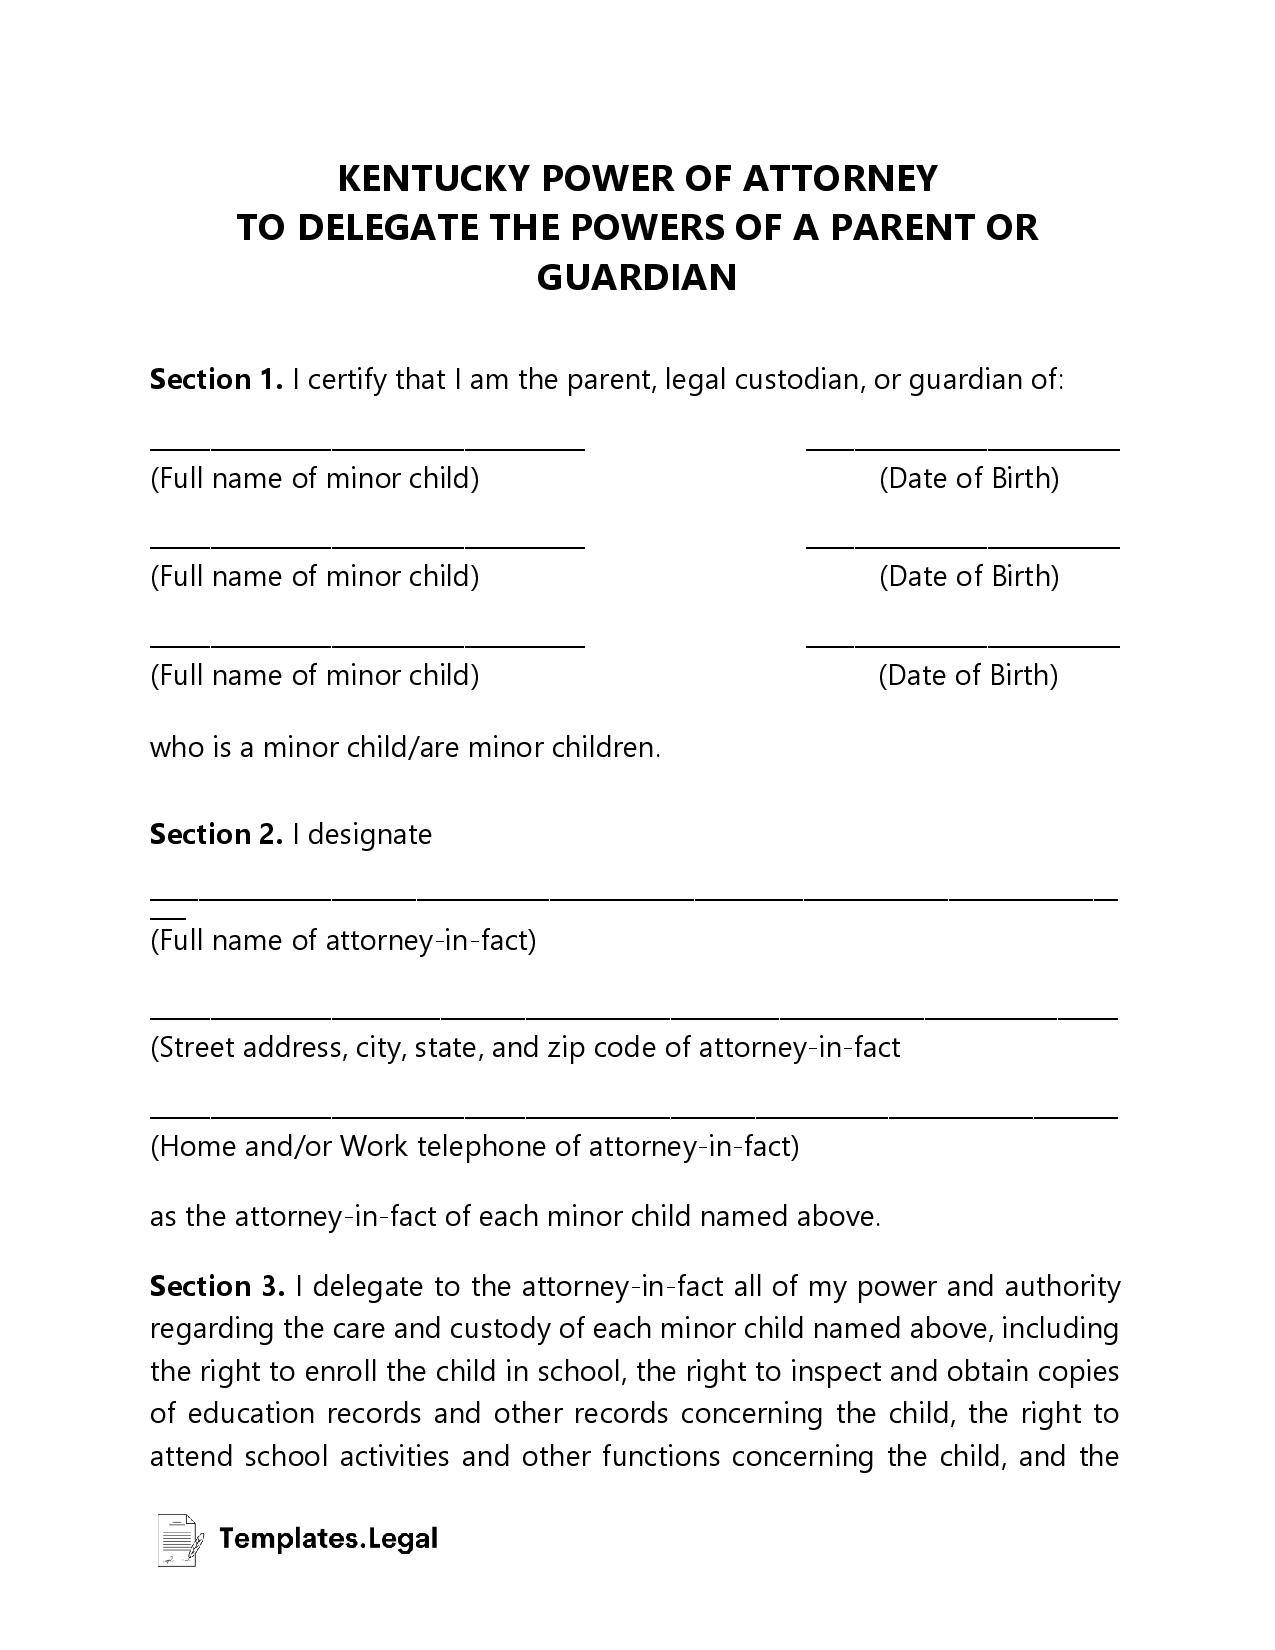 Kentucky Minor (Child) Power of Attorney - Templates.Legal